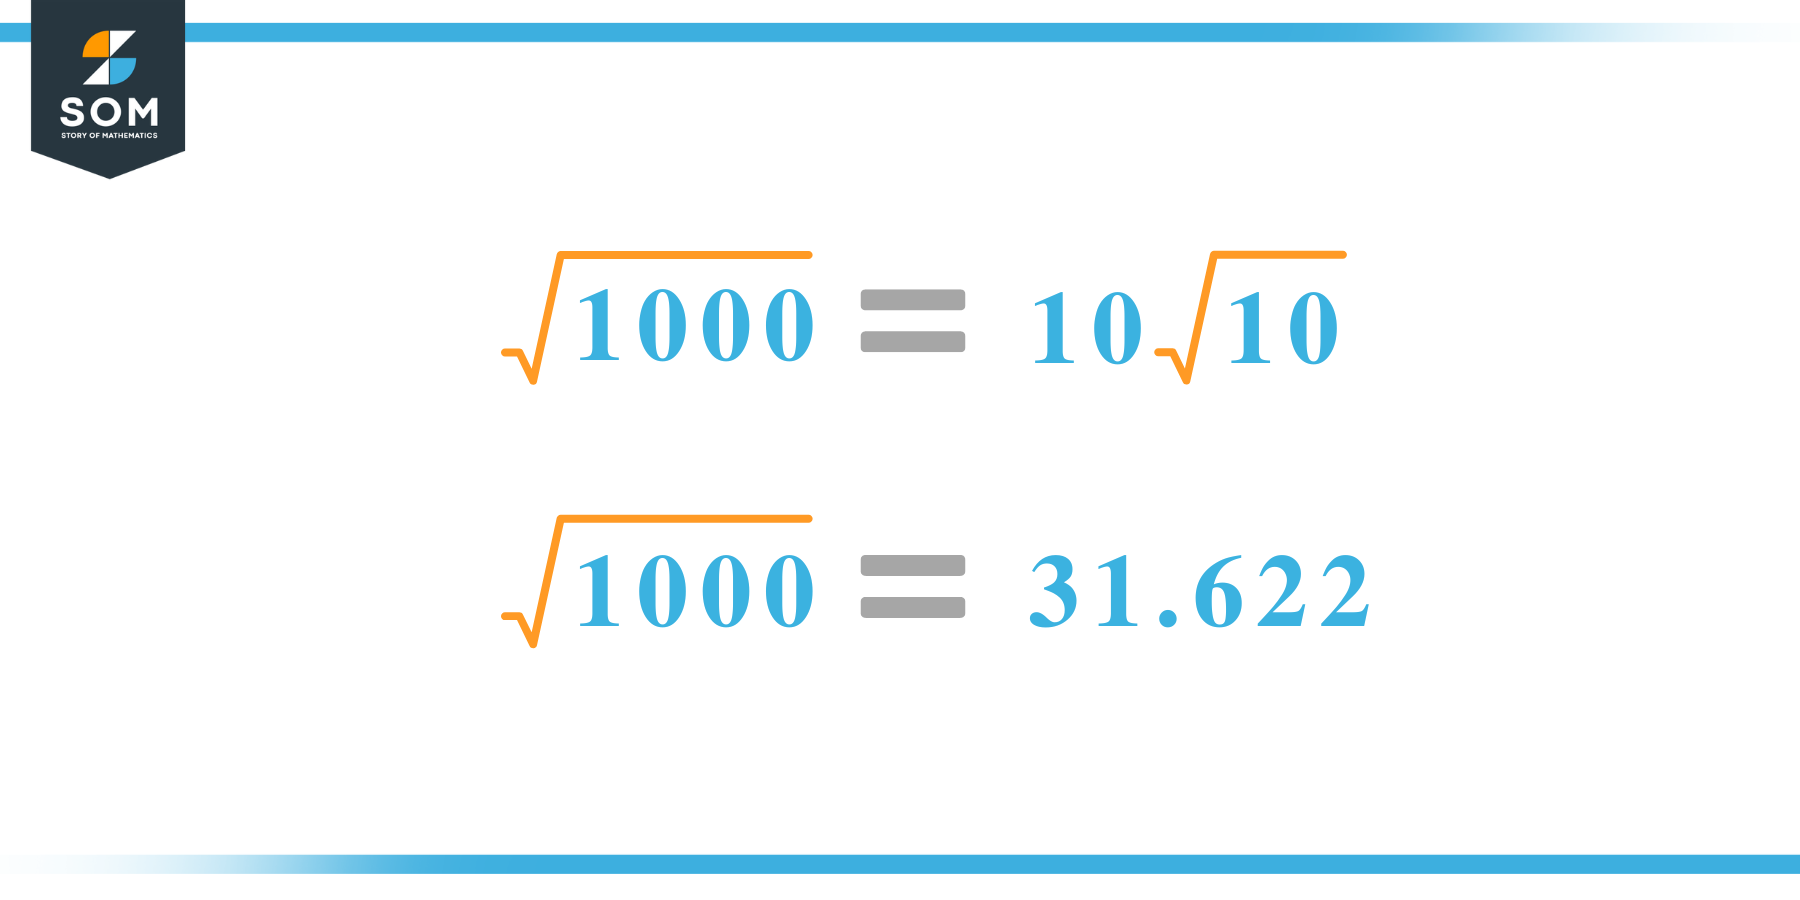 Square root of 1000 Calculation